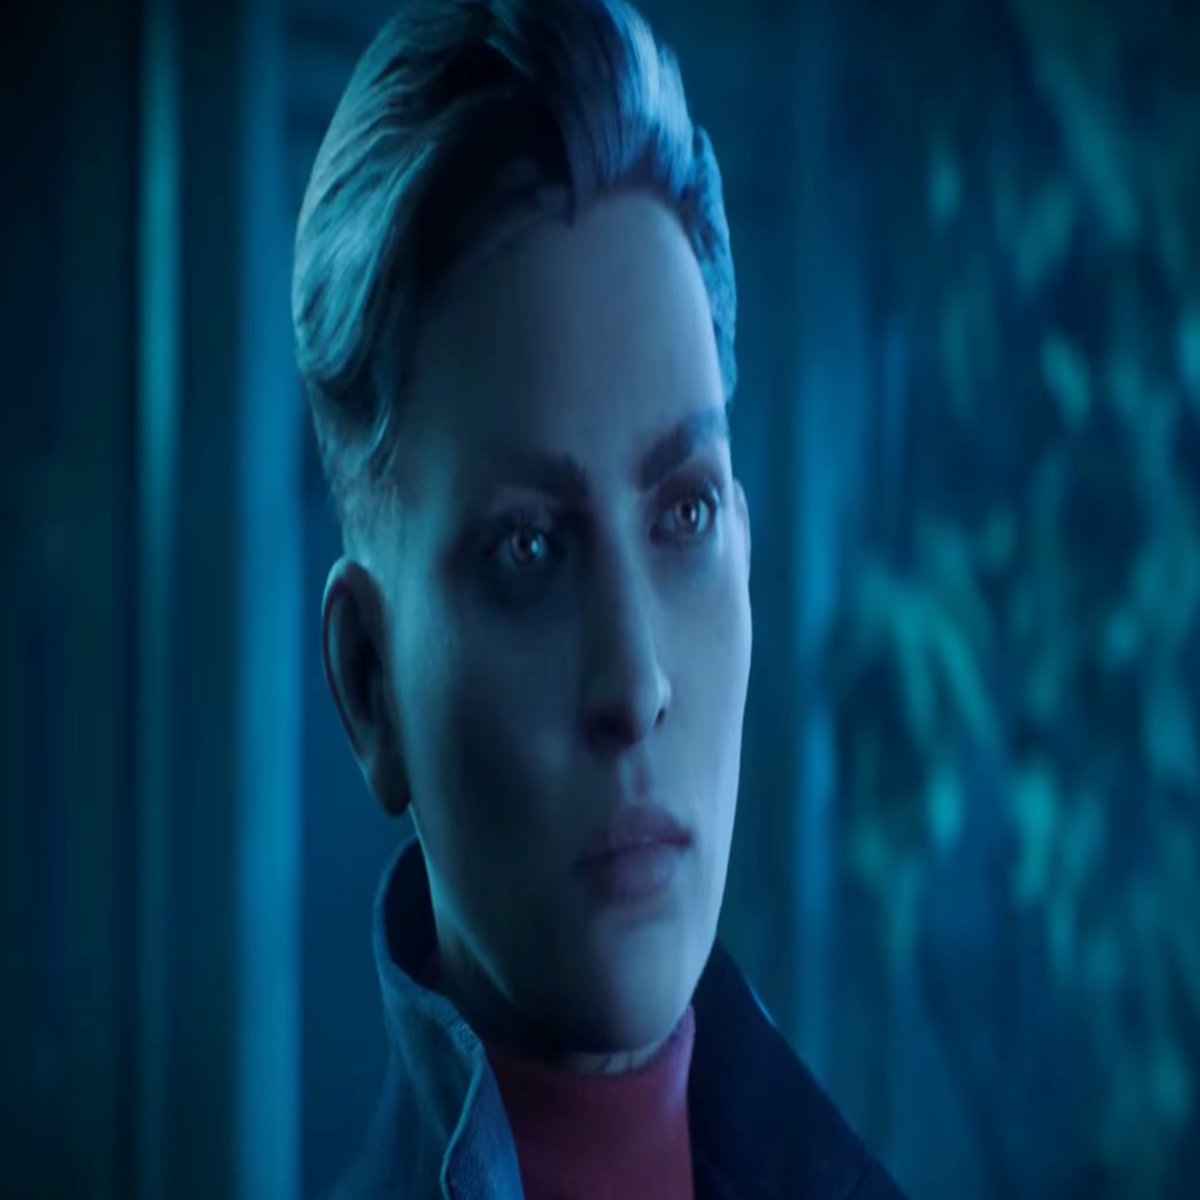 Meet Vampire The Masquerade Bloodlines 2's player character, Phyre